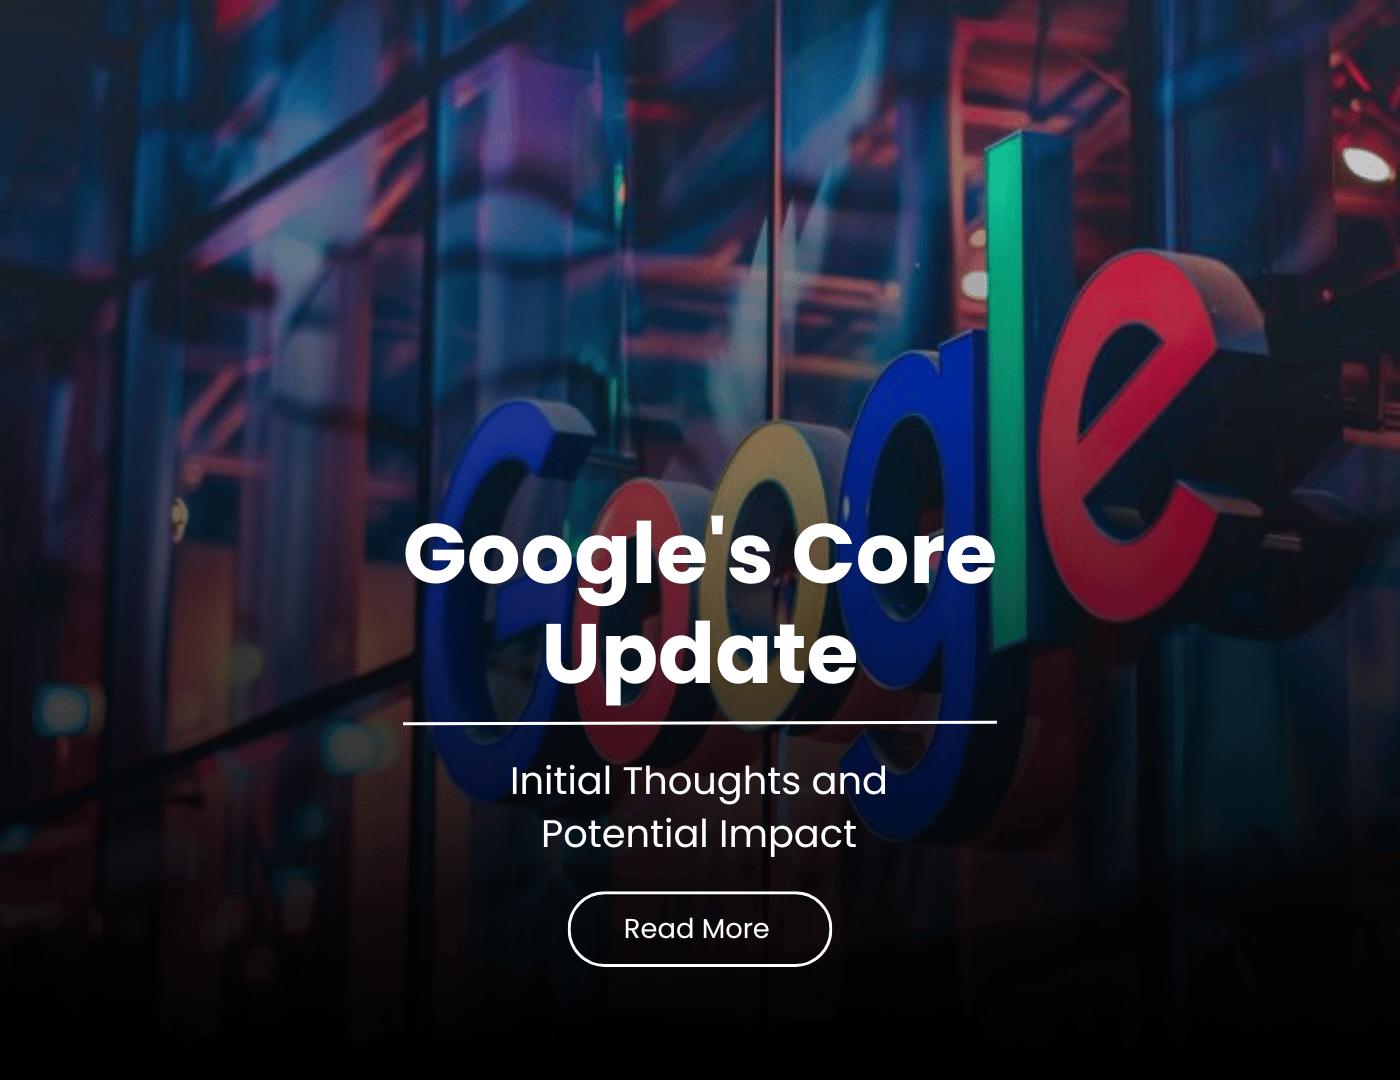 Google's Core Update: Initial Thoughts and Potential Impact